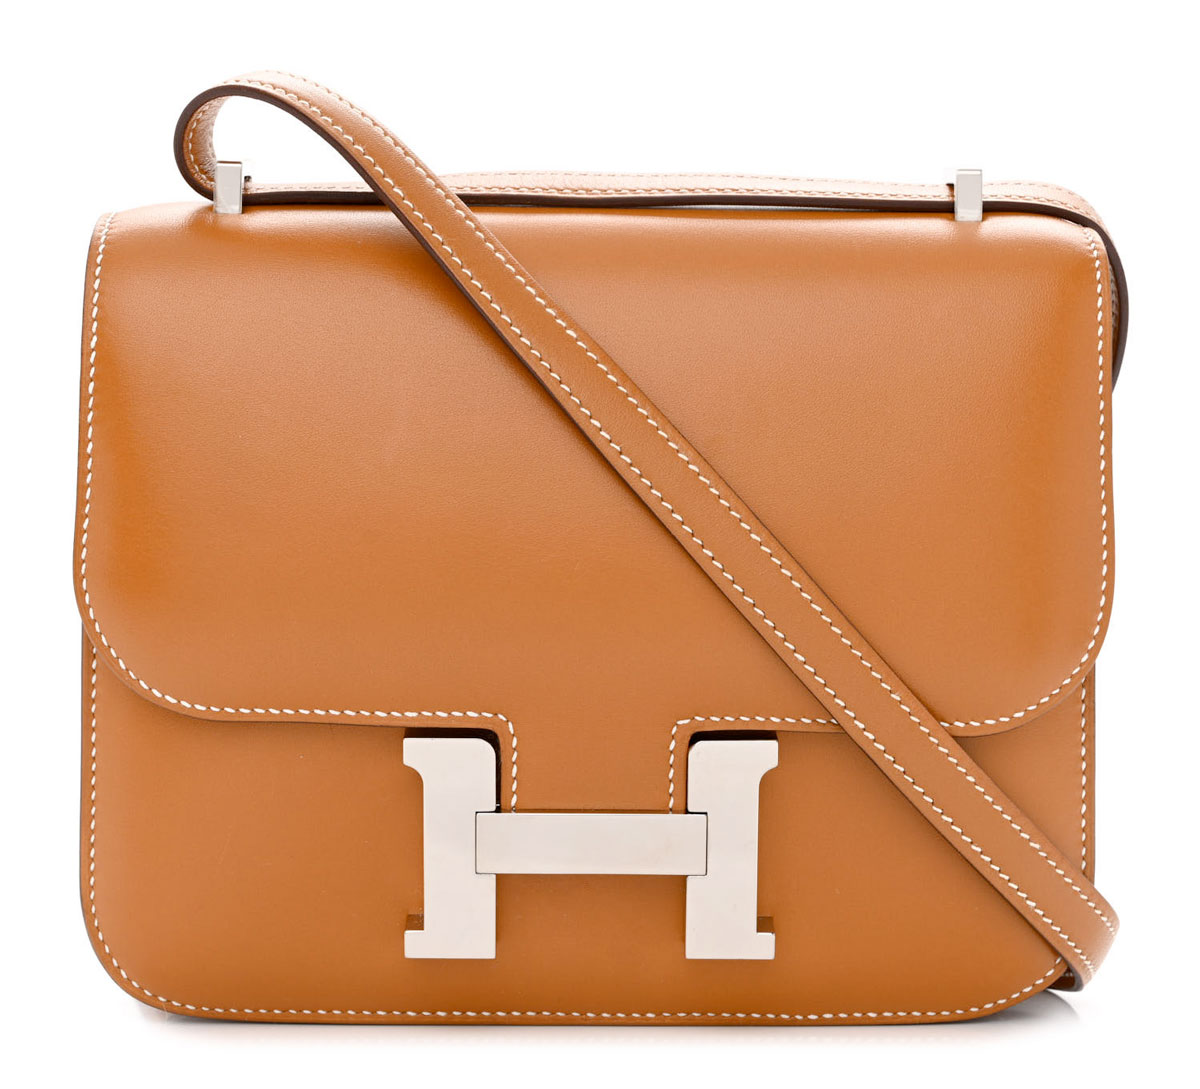 Hermès: An Introduction To Their Leathers - BAGAHOLICBOY